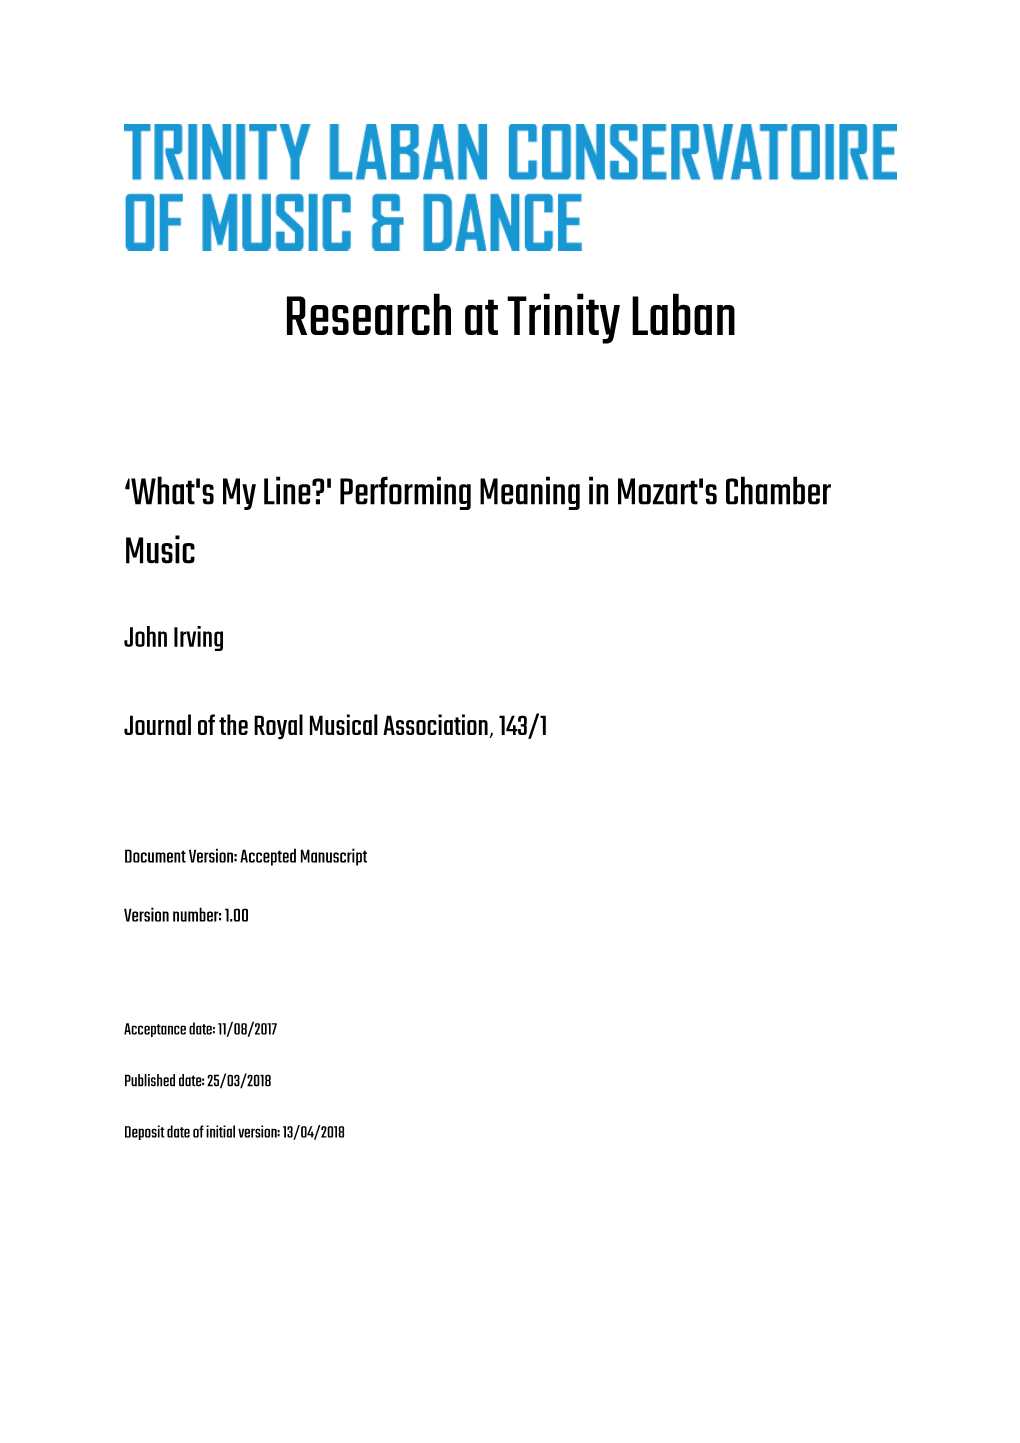 Research at Trinity Laban